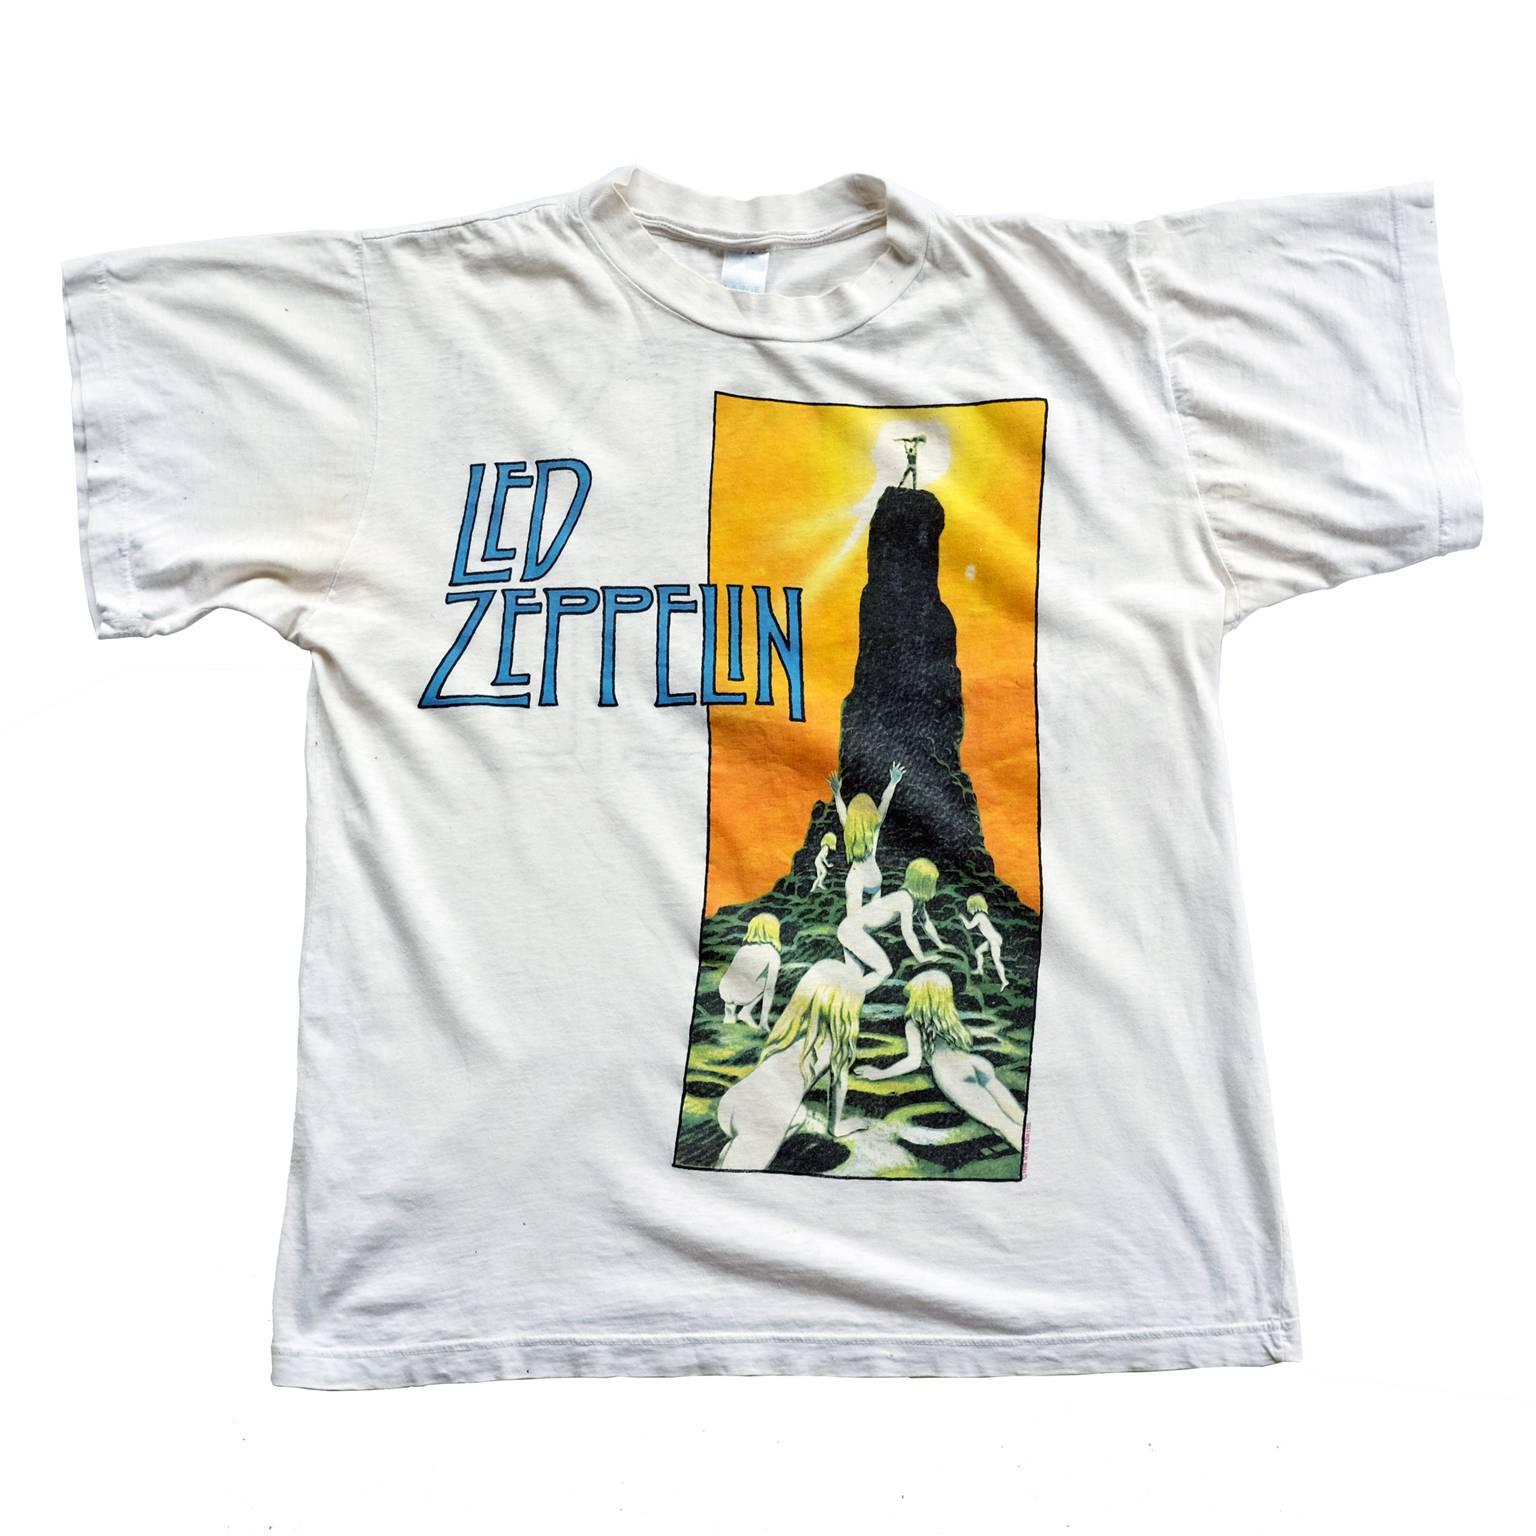 Vintage 1980s Led Zeppelin Houses of the Holy Rock Band T-Shirt Large